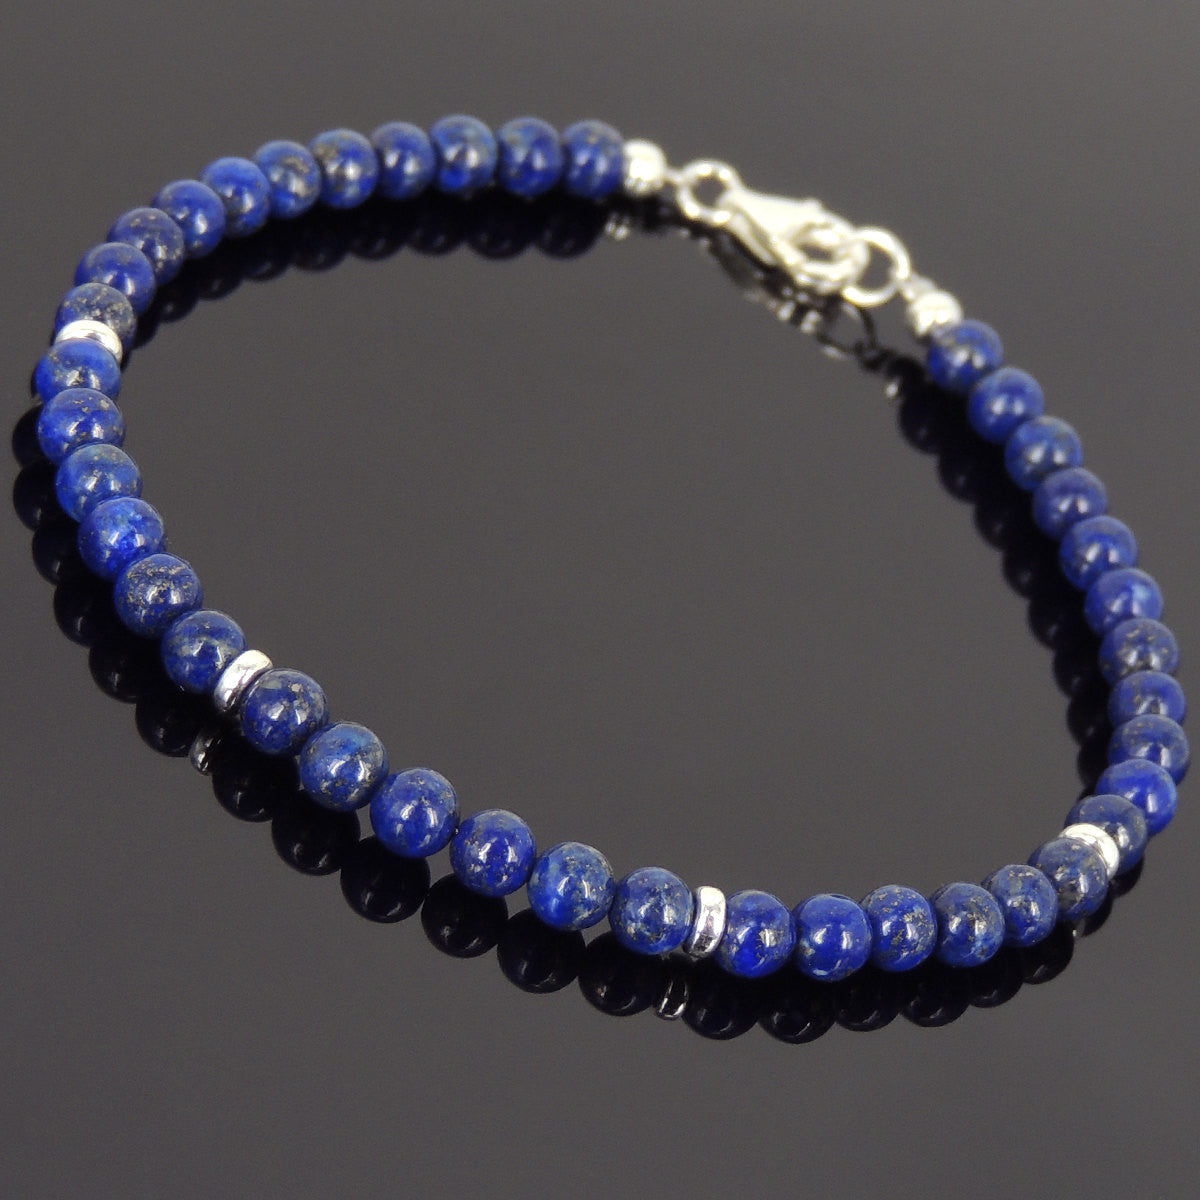 4mm Lapis Lazuli Healing Gemstone Bracelet with S925 Sterling Silver Seamless Spacers & Clasp - Handmade by Gem & Silver BR642